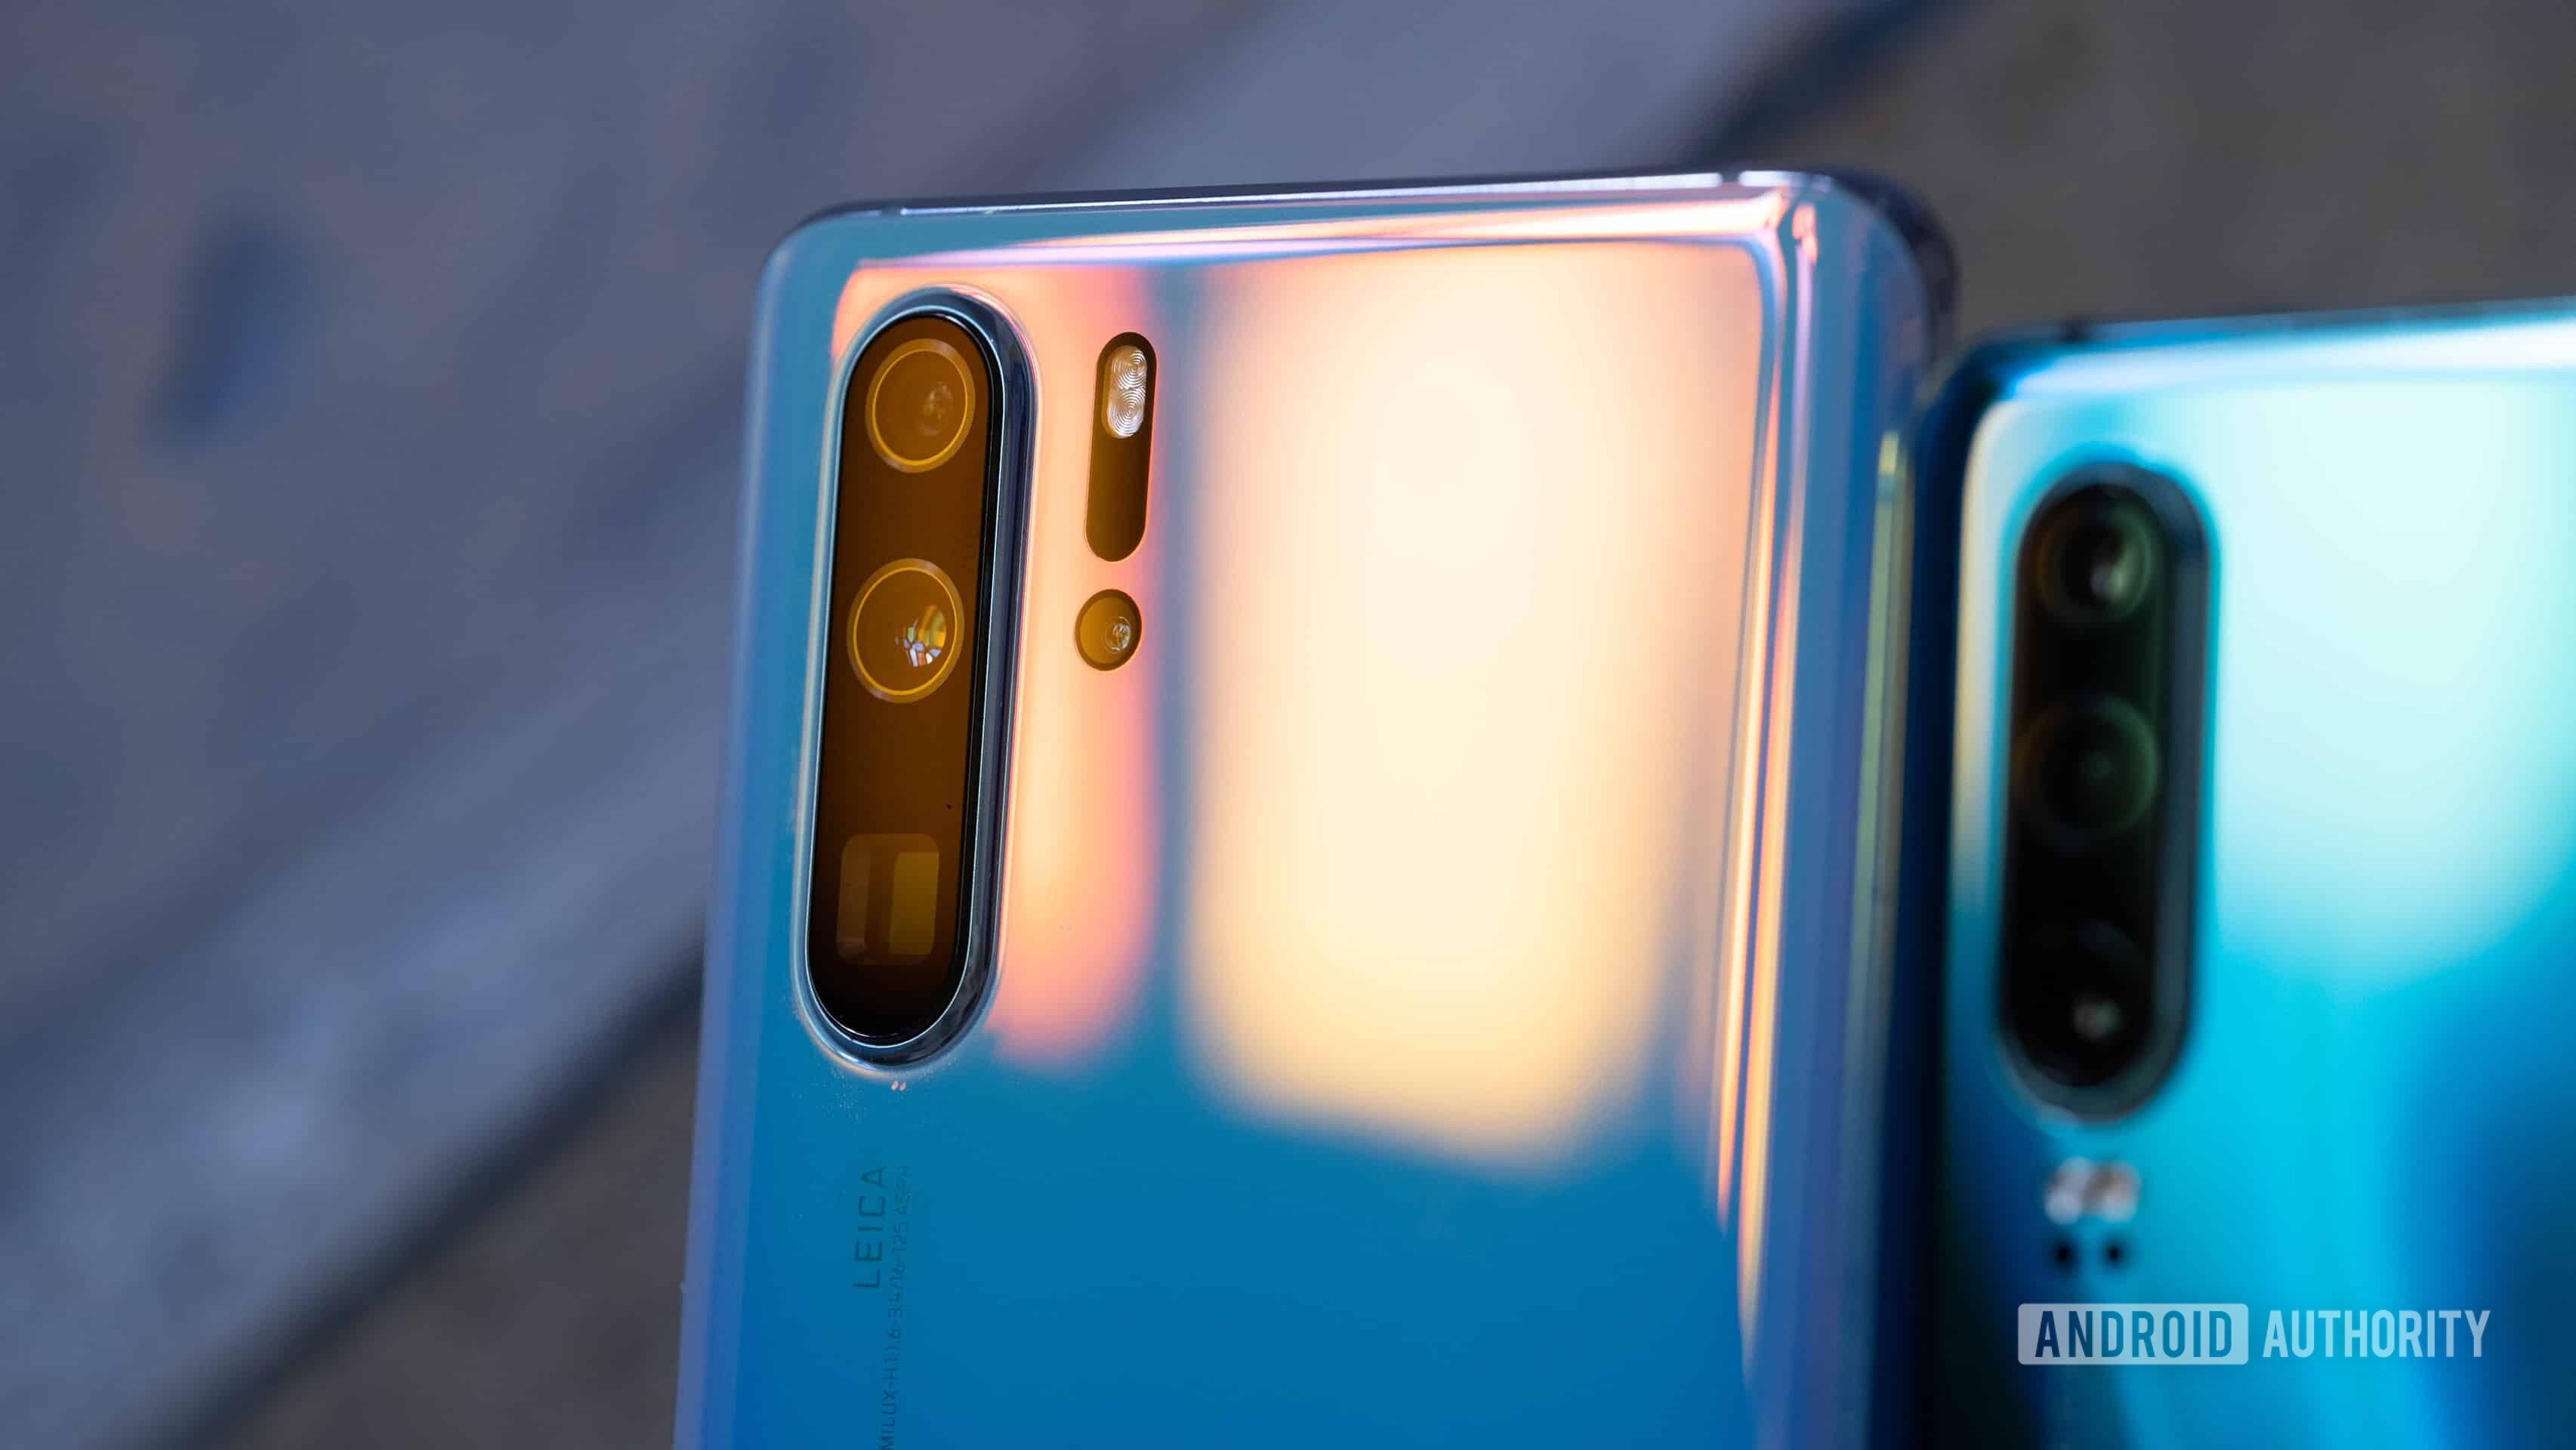 Huawei P30 Pro camera array with glare